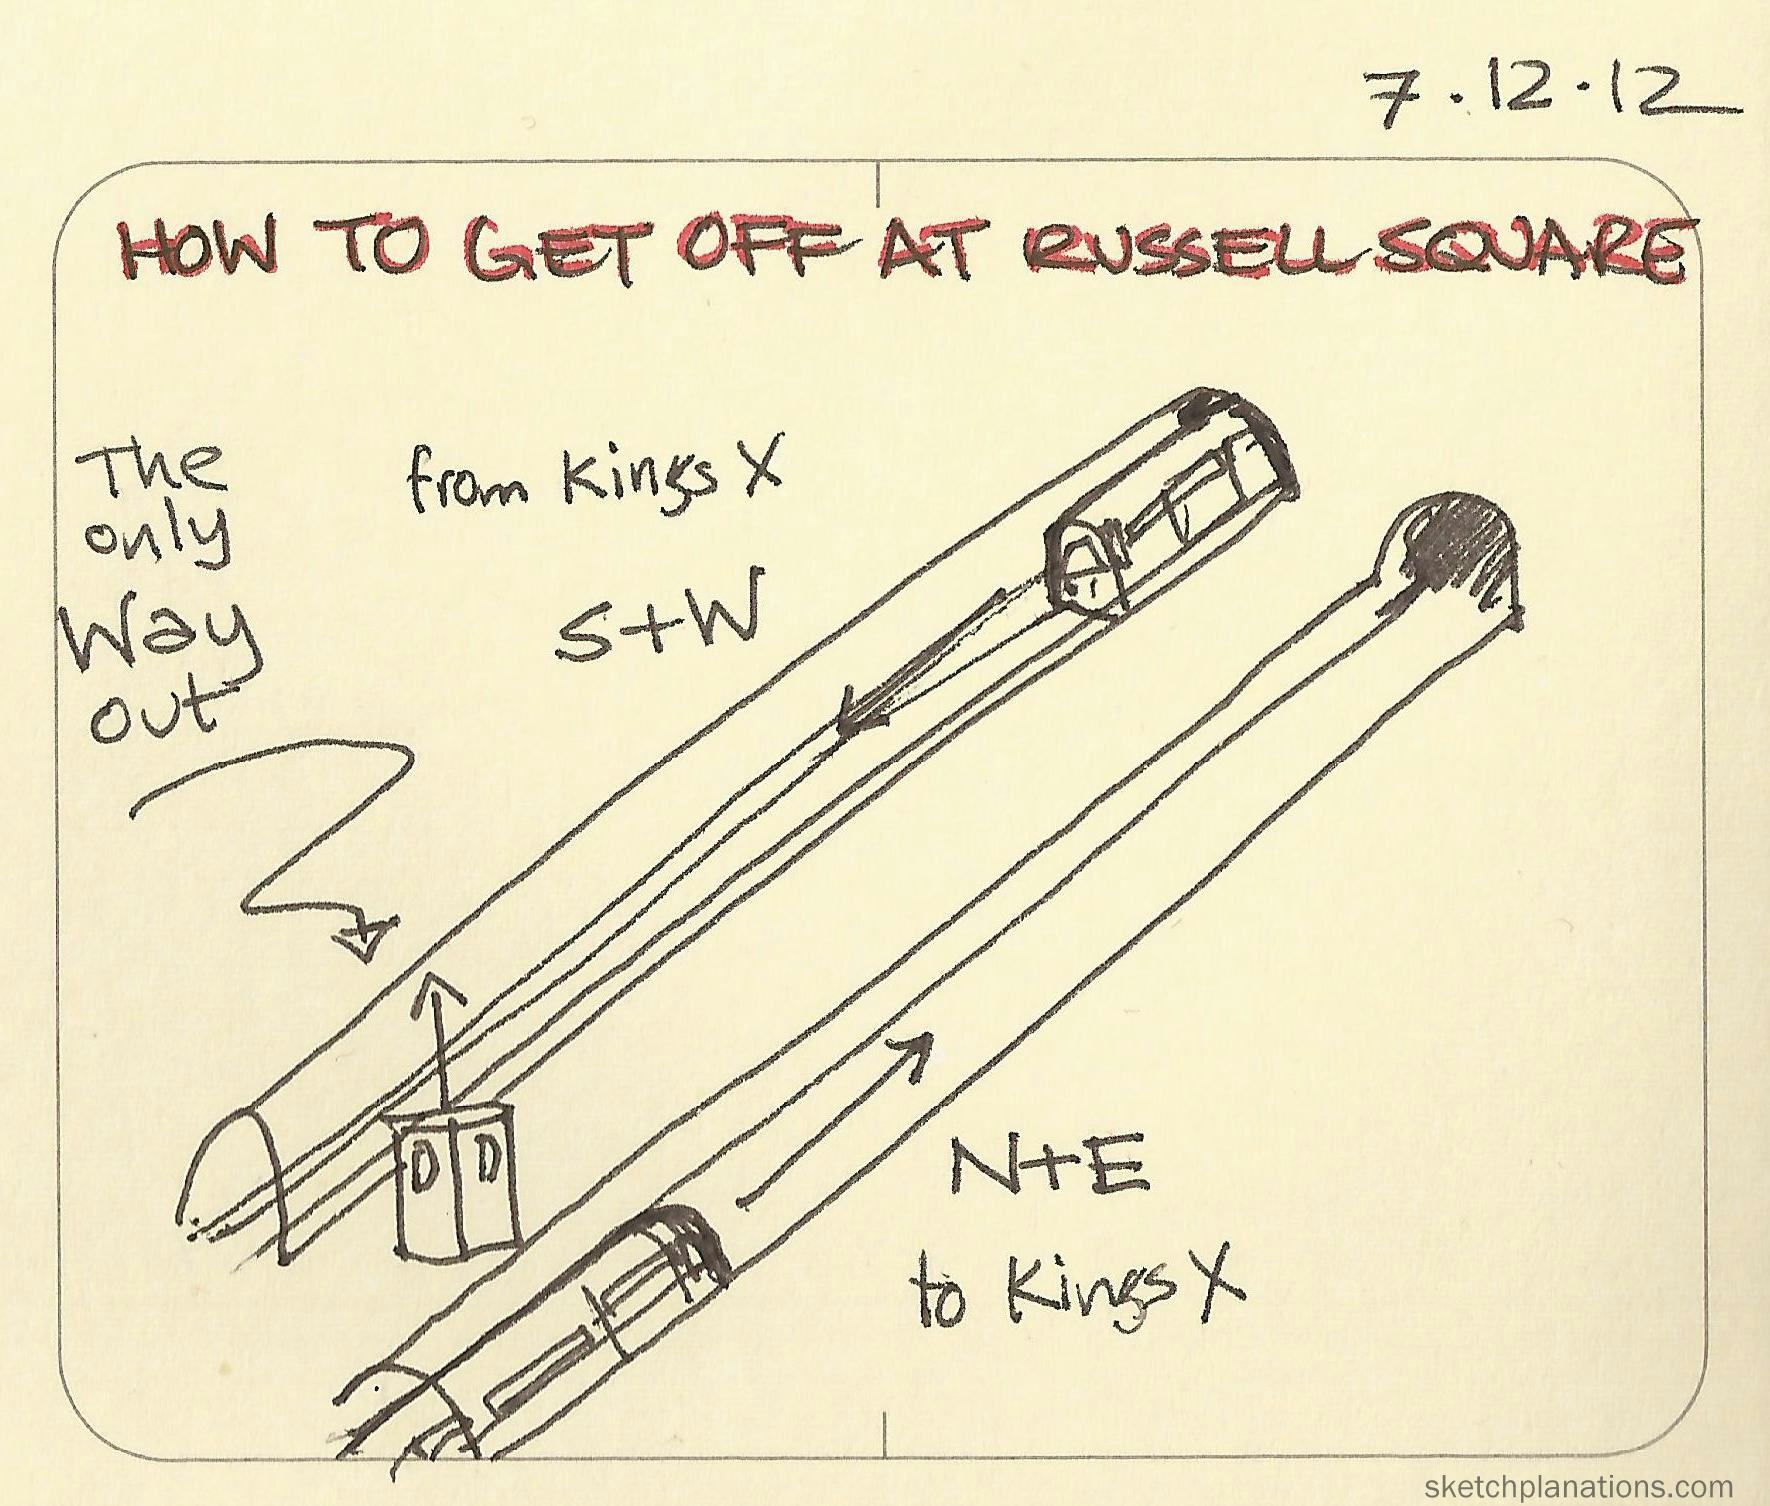 How to get off at Russell Square - Sketchplanations